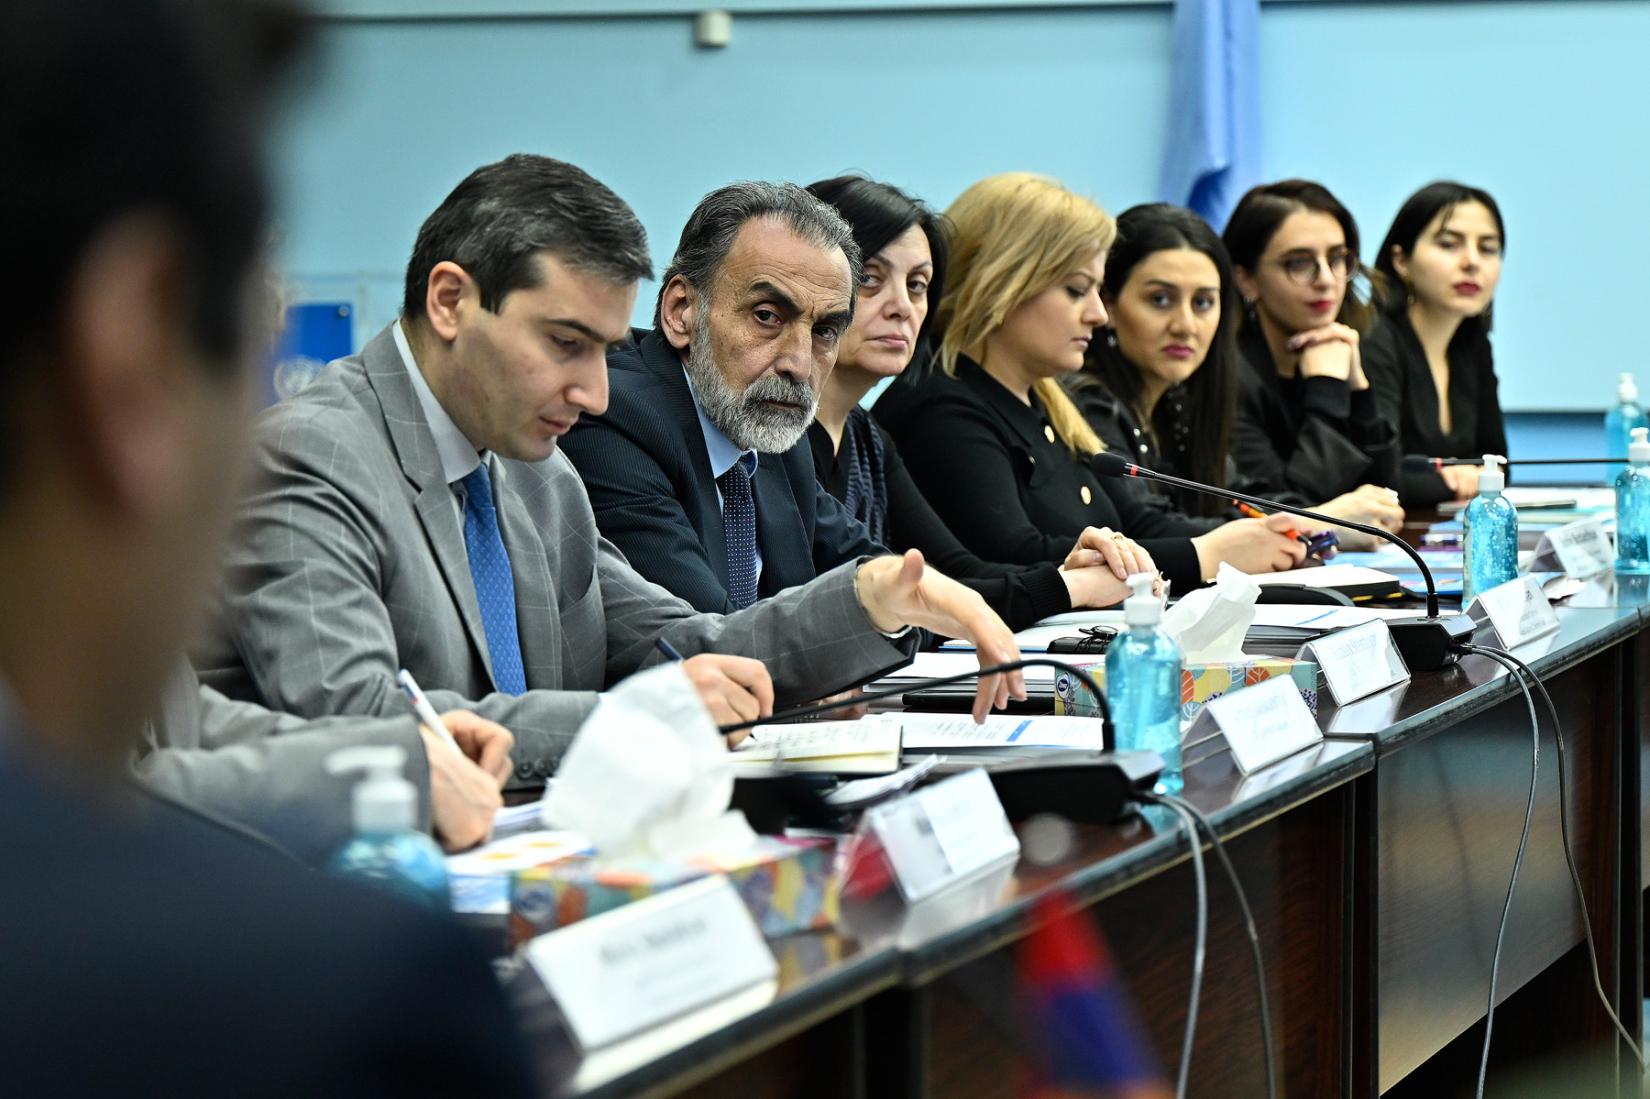 8 people attending the Kick-Off meeting of the outcome groups for the 2021-2025 UN Sustainable Development Cooperation Framework for Armenia.